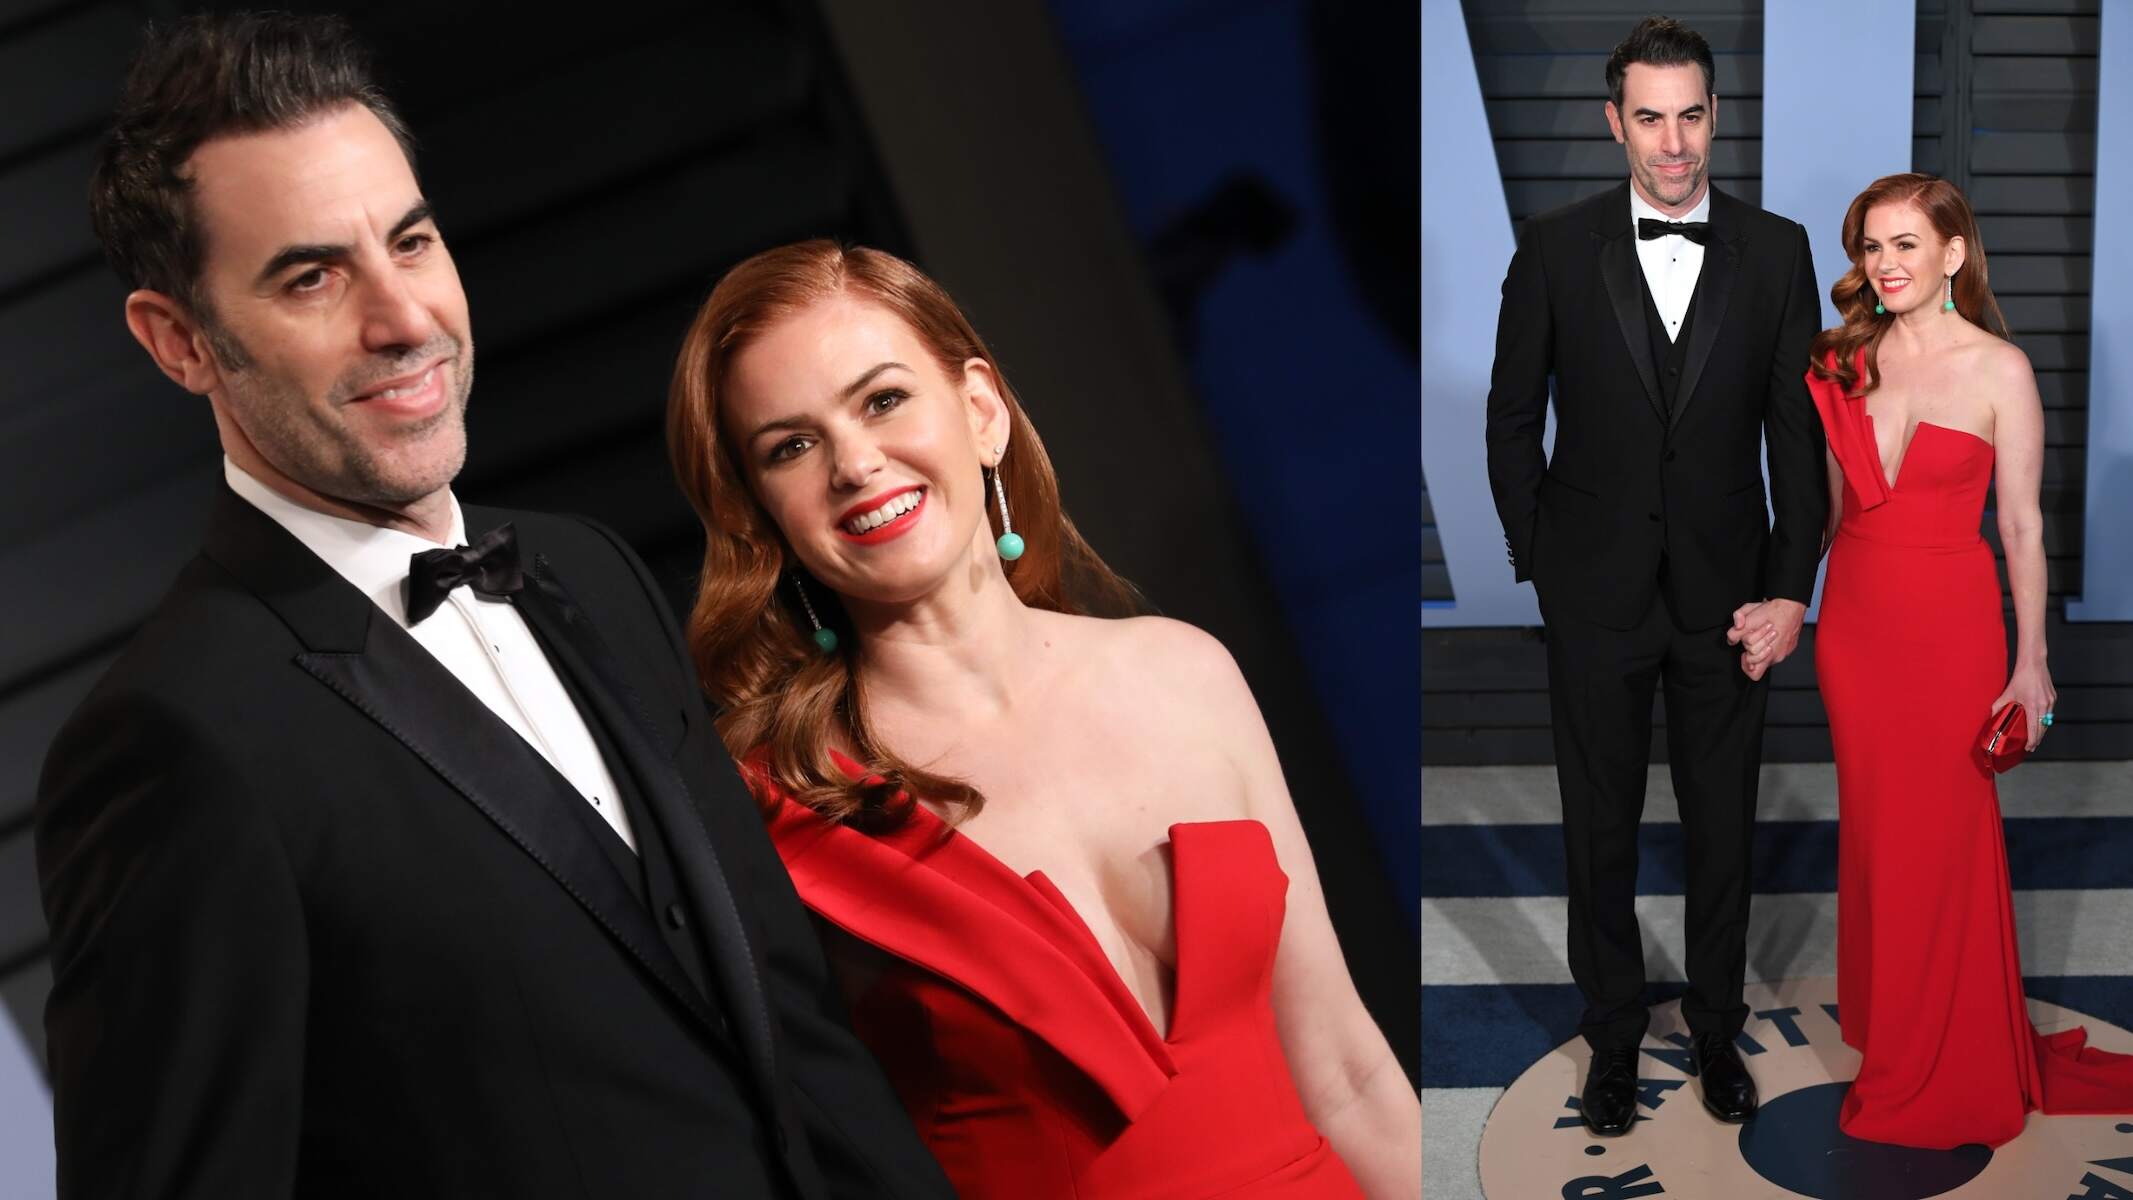 Wearing a black tuxedo Sacha Baron Cohen stands with his wife Isla Fisher, who's wearing a red gown, at the 2018 Oscar Party